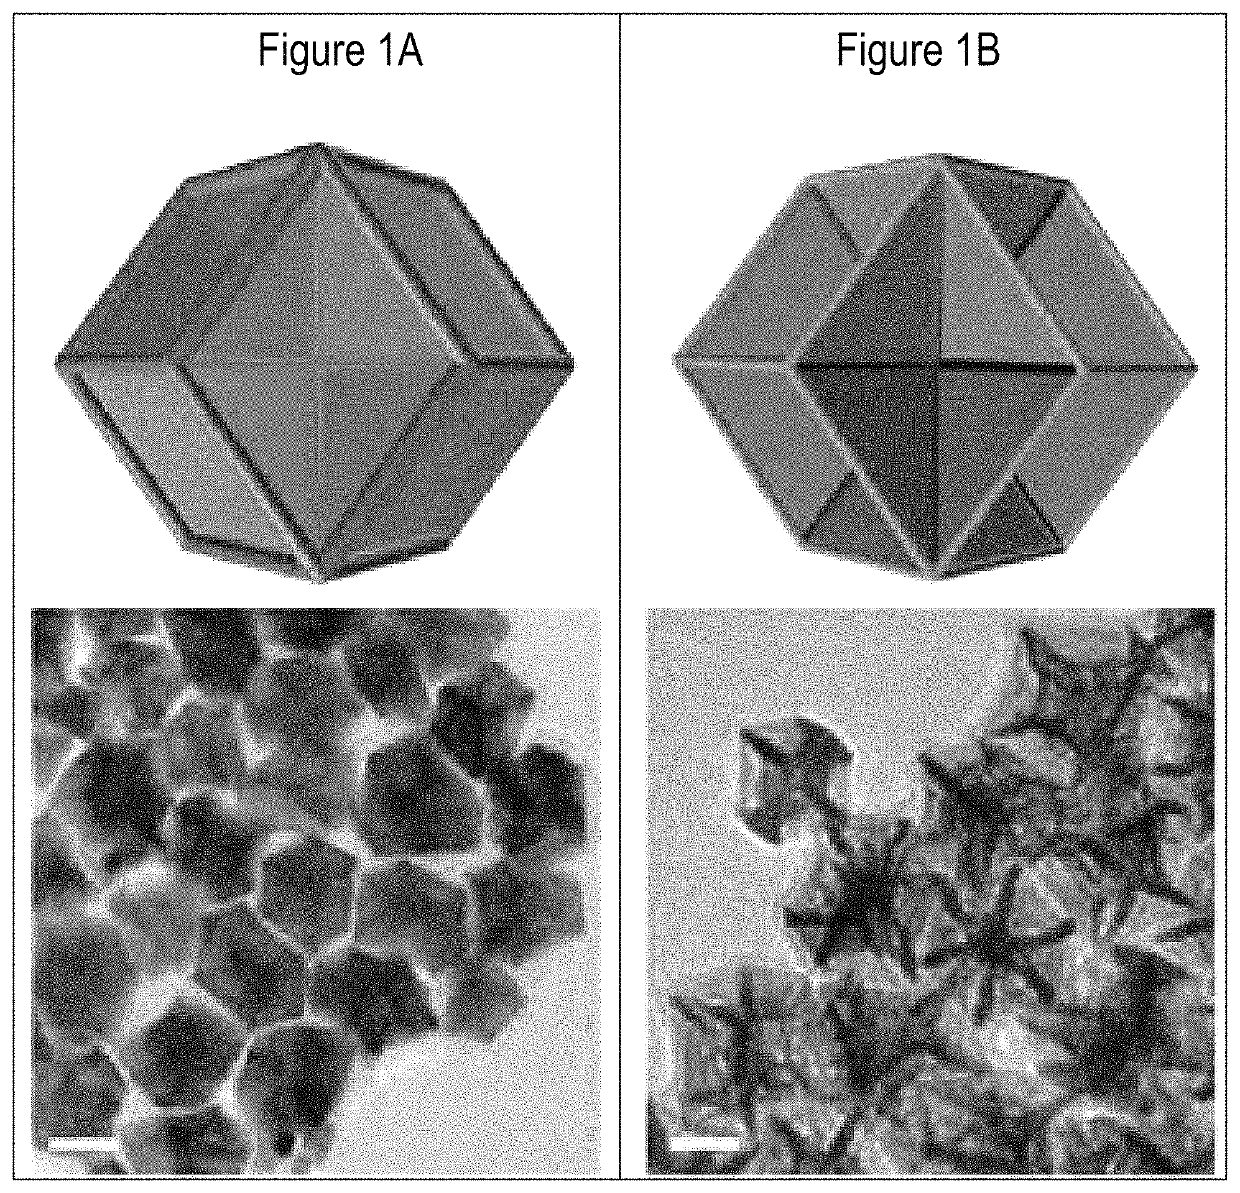 Excavated nanoframes with three-dimensional electrocatalytic surfaces